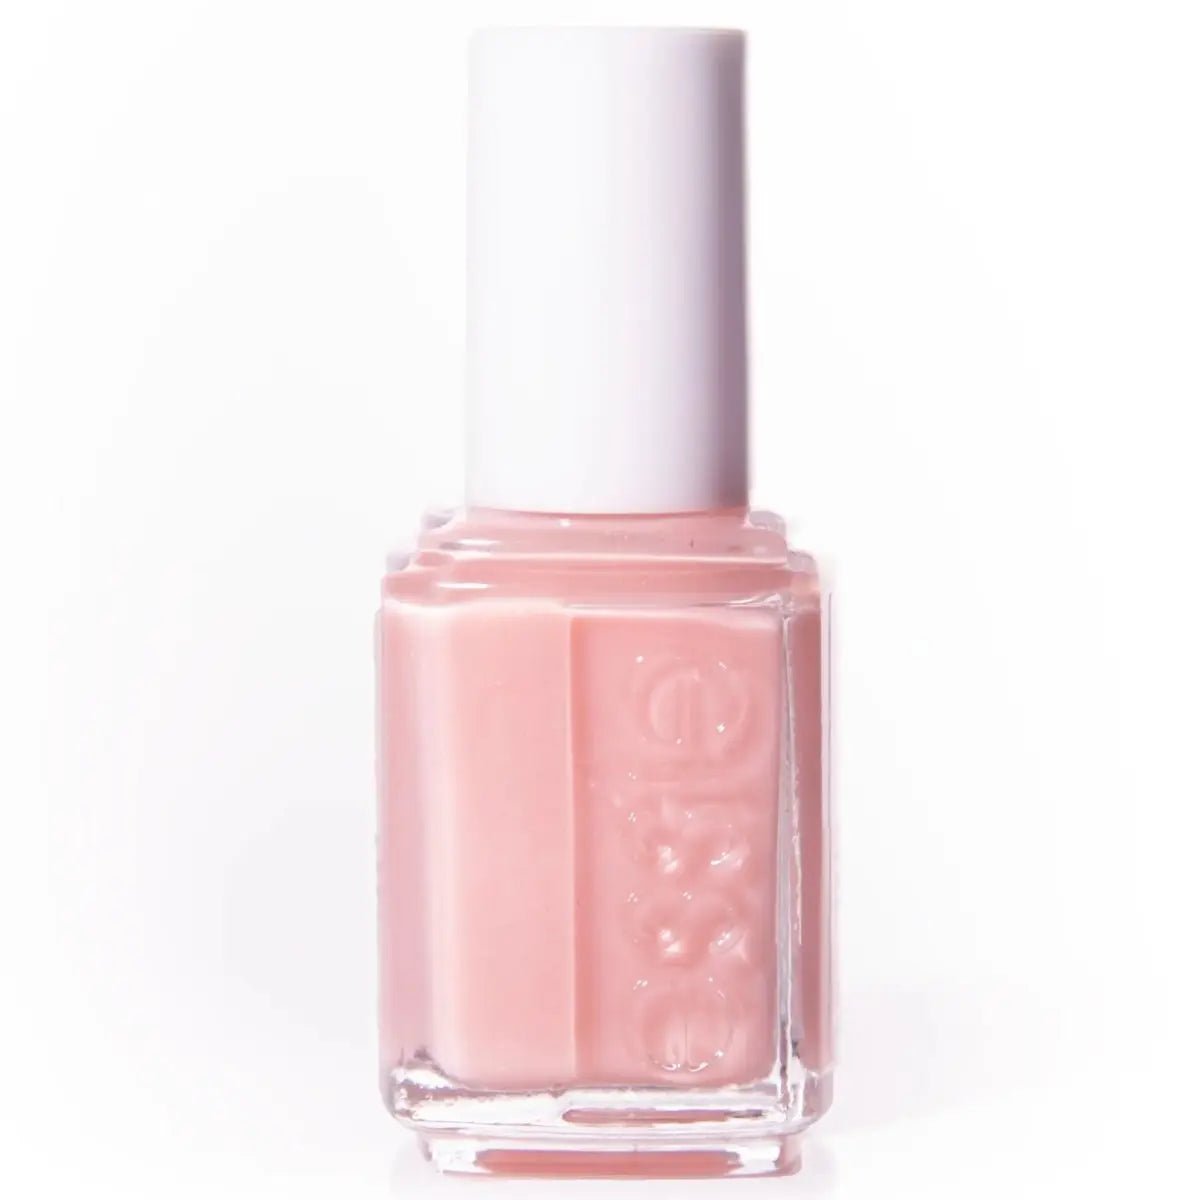 Image of Essie Treat Love Colour Care Nail Varnish